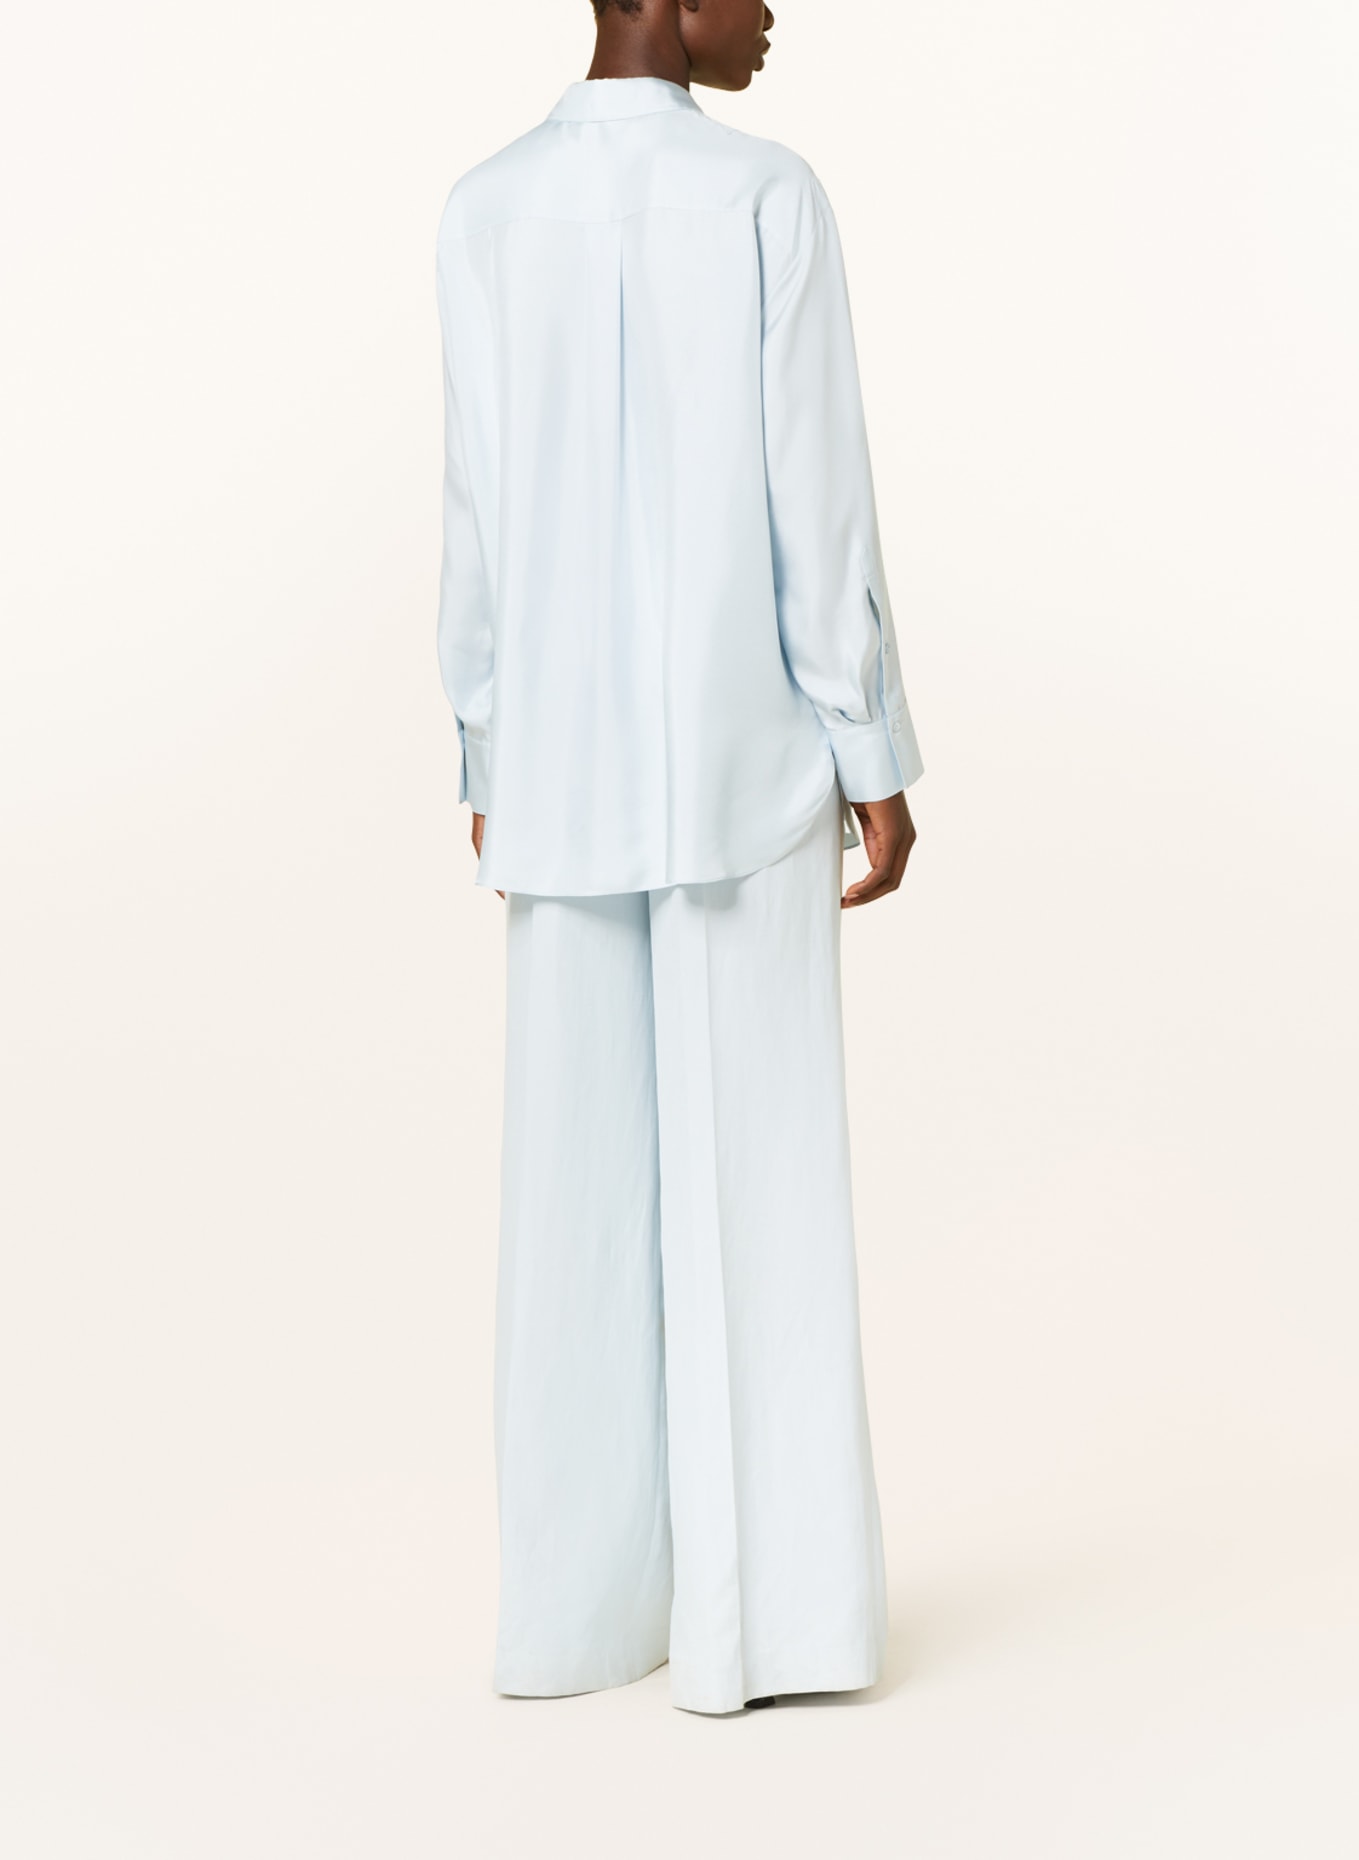 DOROTHEE SCHUMACHER Shirt blouse made of silk with lace, Color: LIGHT BLUE (Image 3)